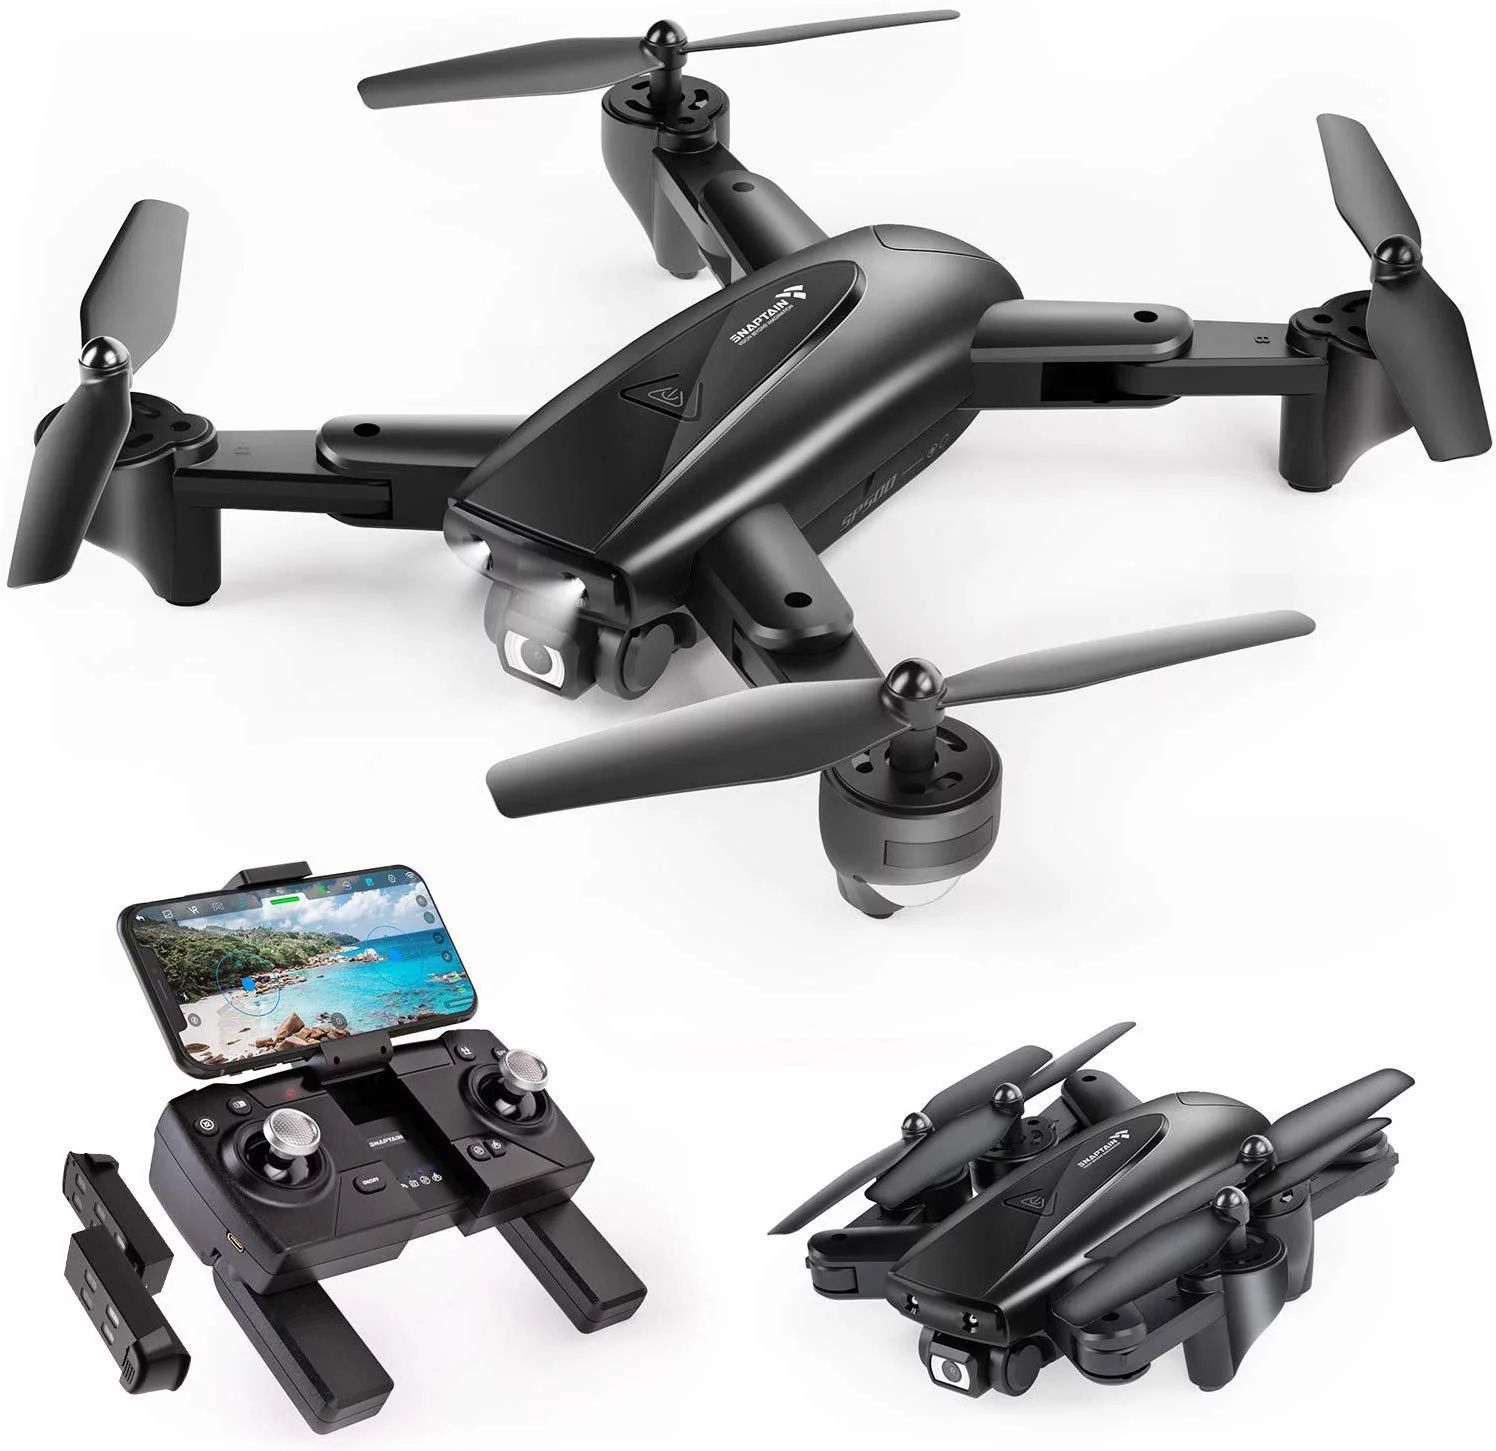 SNAPTAIN SP500 Foldable GPS FPV Drone with 1080P HD Camera Live Video for Beginners, RC Quadcopte... | Walmart (US)